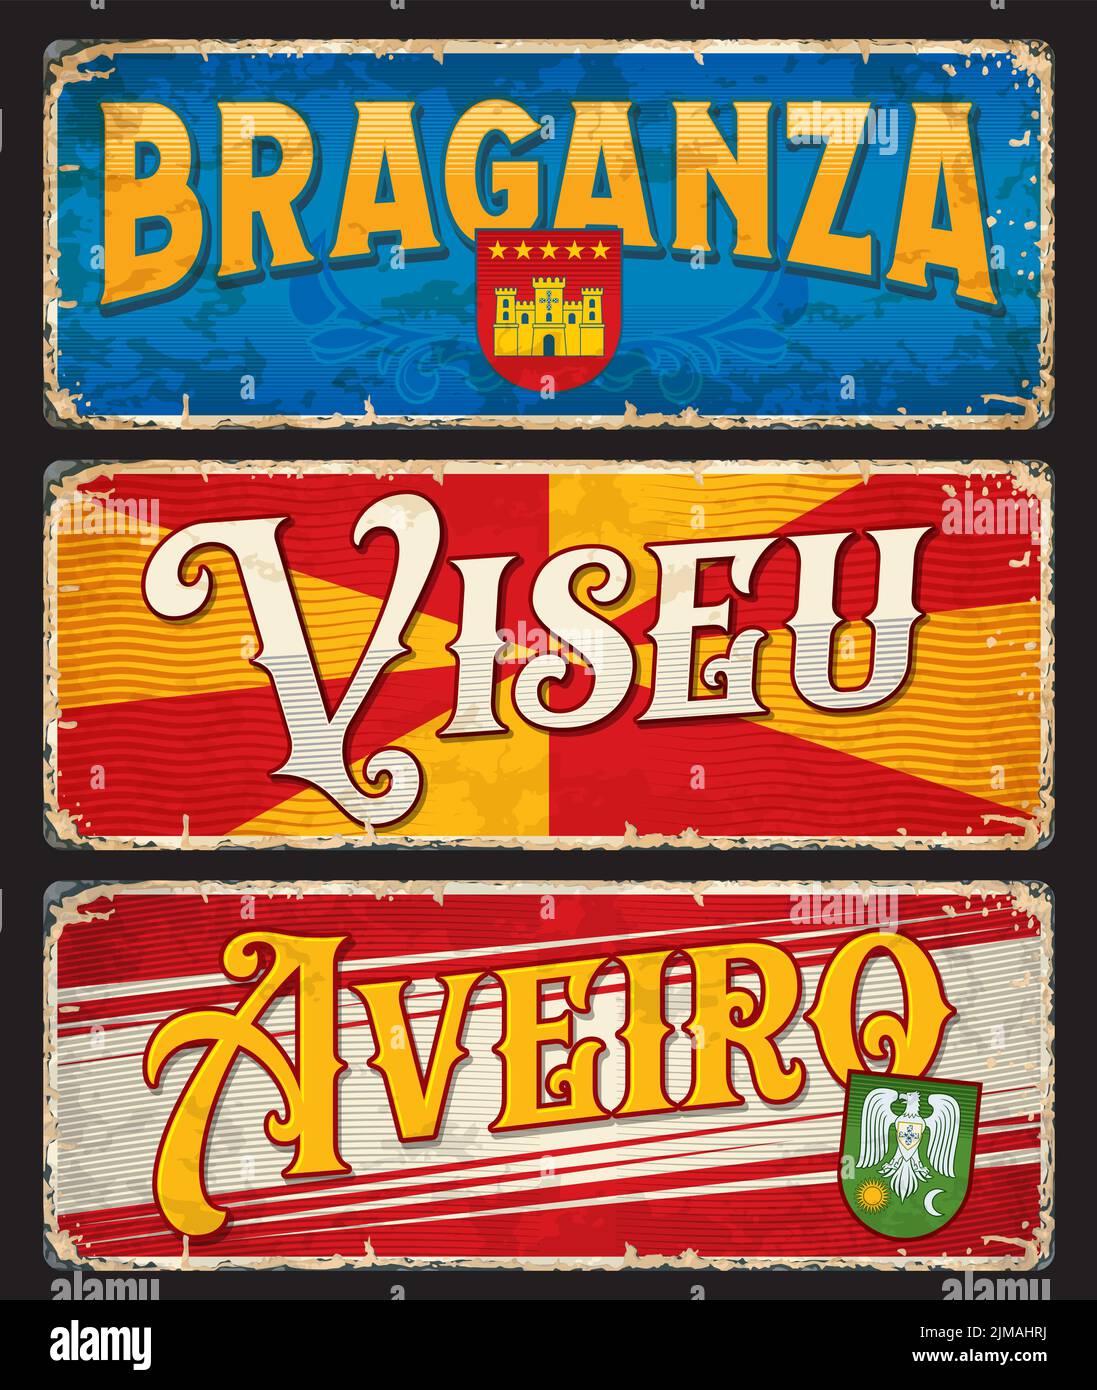 Viseu, Braganza, Aveiro, Portuguese city plates and travel stickers, vector luggage tags. Portugal cities tin signs and travel plates with landmarks, Stock Vector